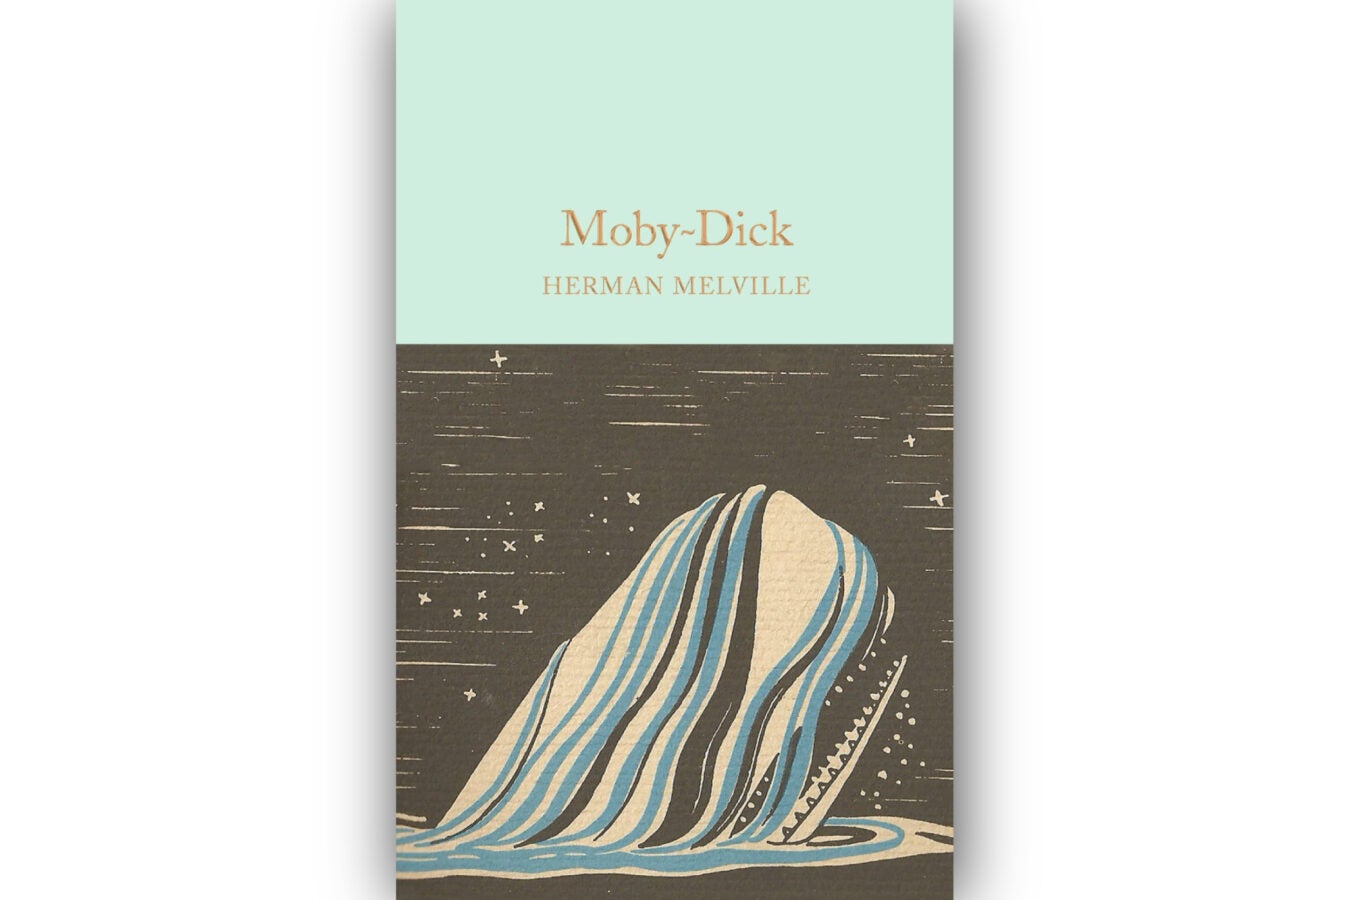 "Moby-Dick" book cover.